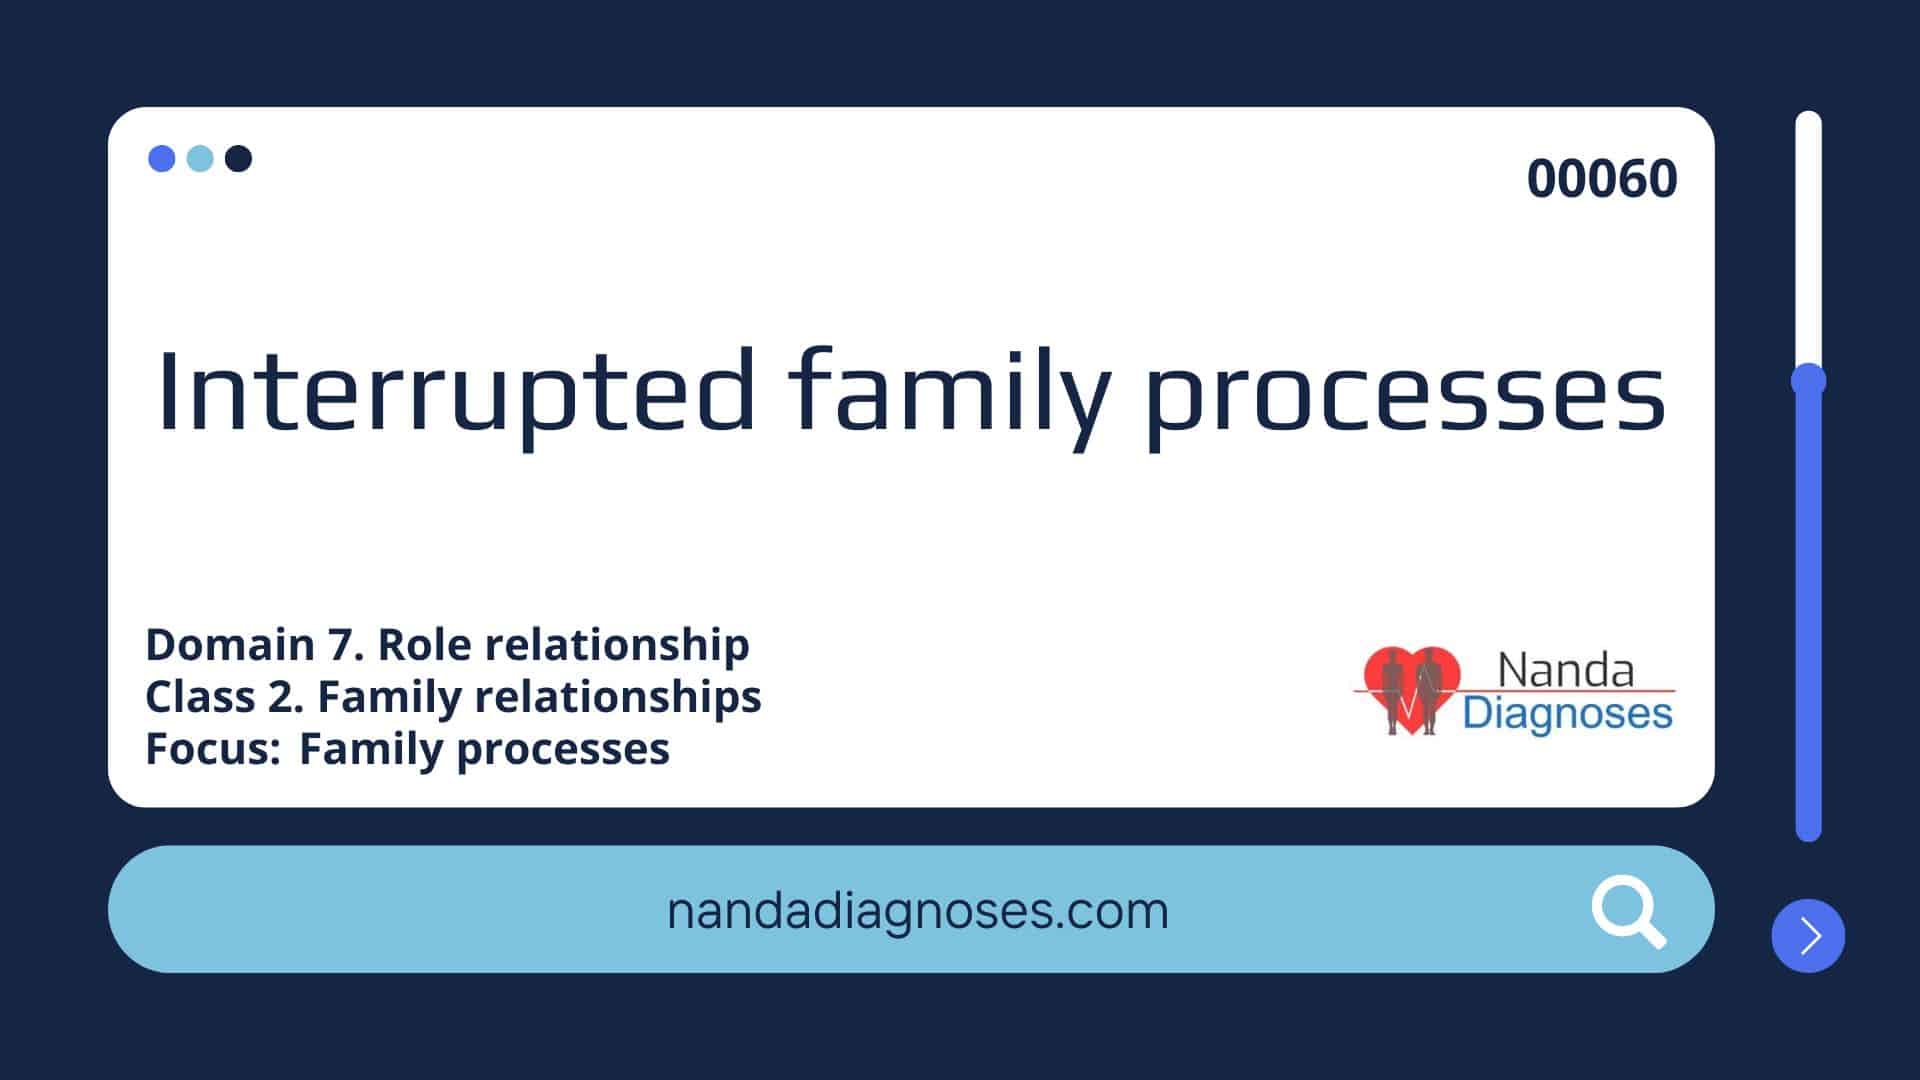 Nursing diagnosis Interrupted family processes